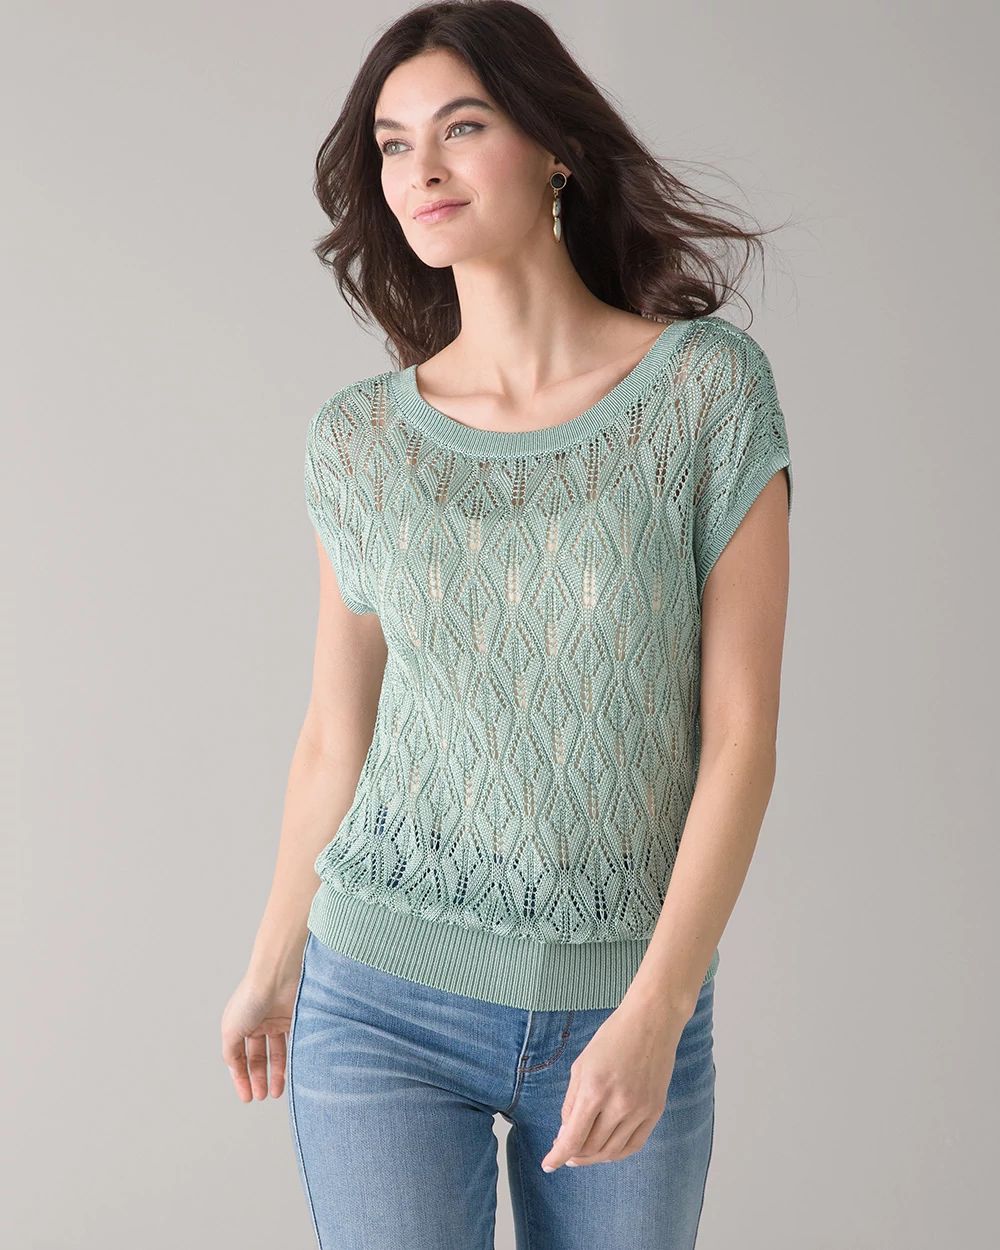 Short-Sleeve V-Back Knit Top click to view larger image.